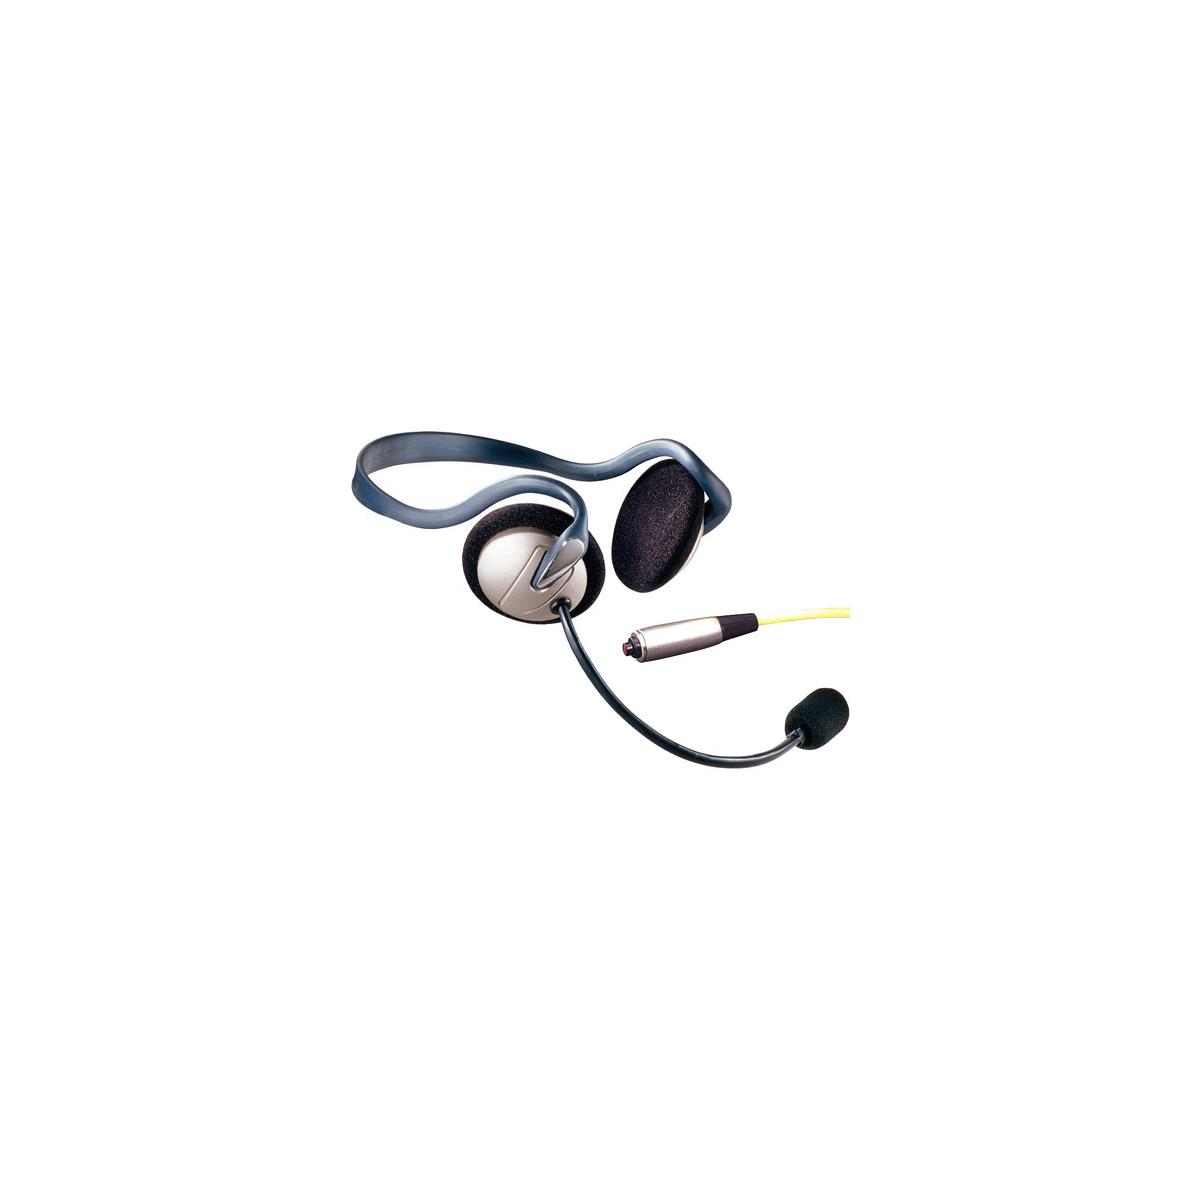 Image of Eartec Monarch Inline Pendant PTT Headset with Mic for SC-1000 2-Way Radios